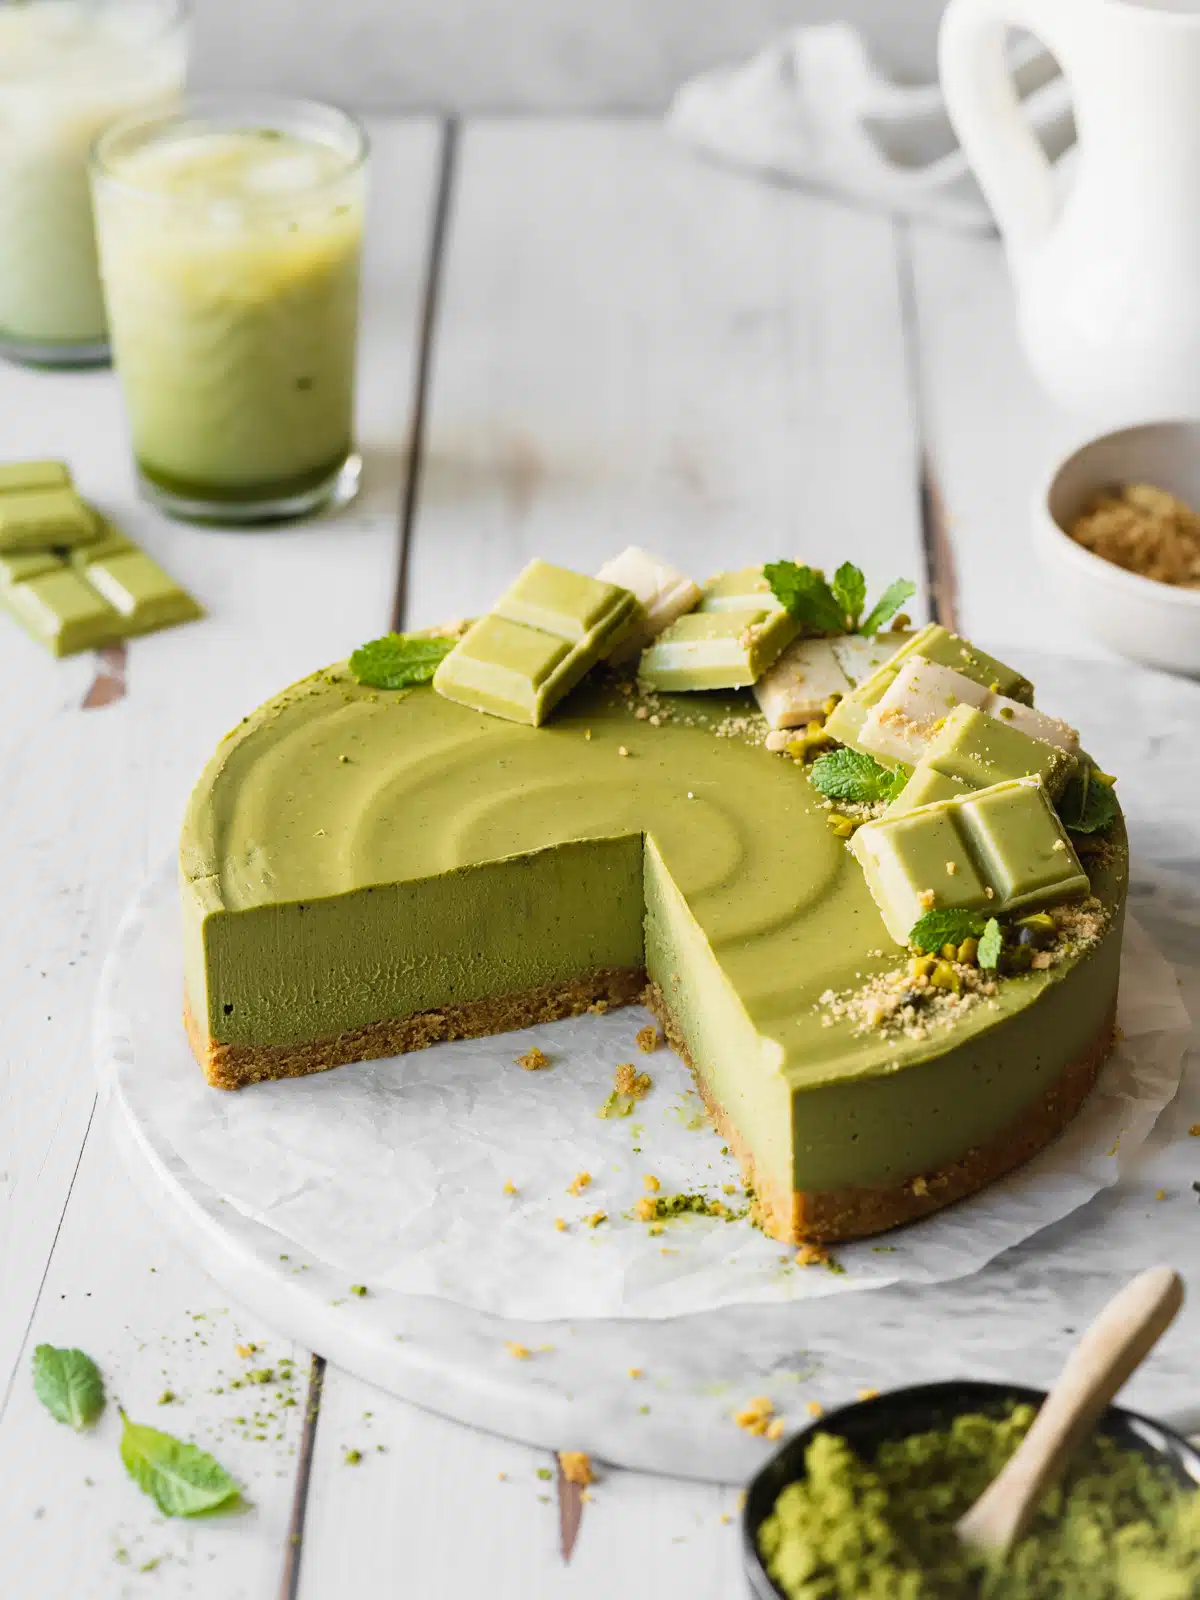 matcha cheesecake with a slice missing from it, decorated with white chocolate and matcha chocolate, with 2 matcha lattes in the background.